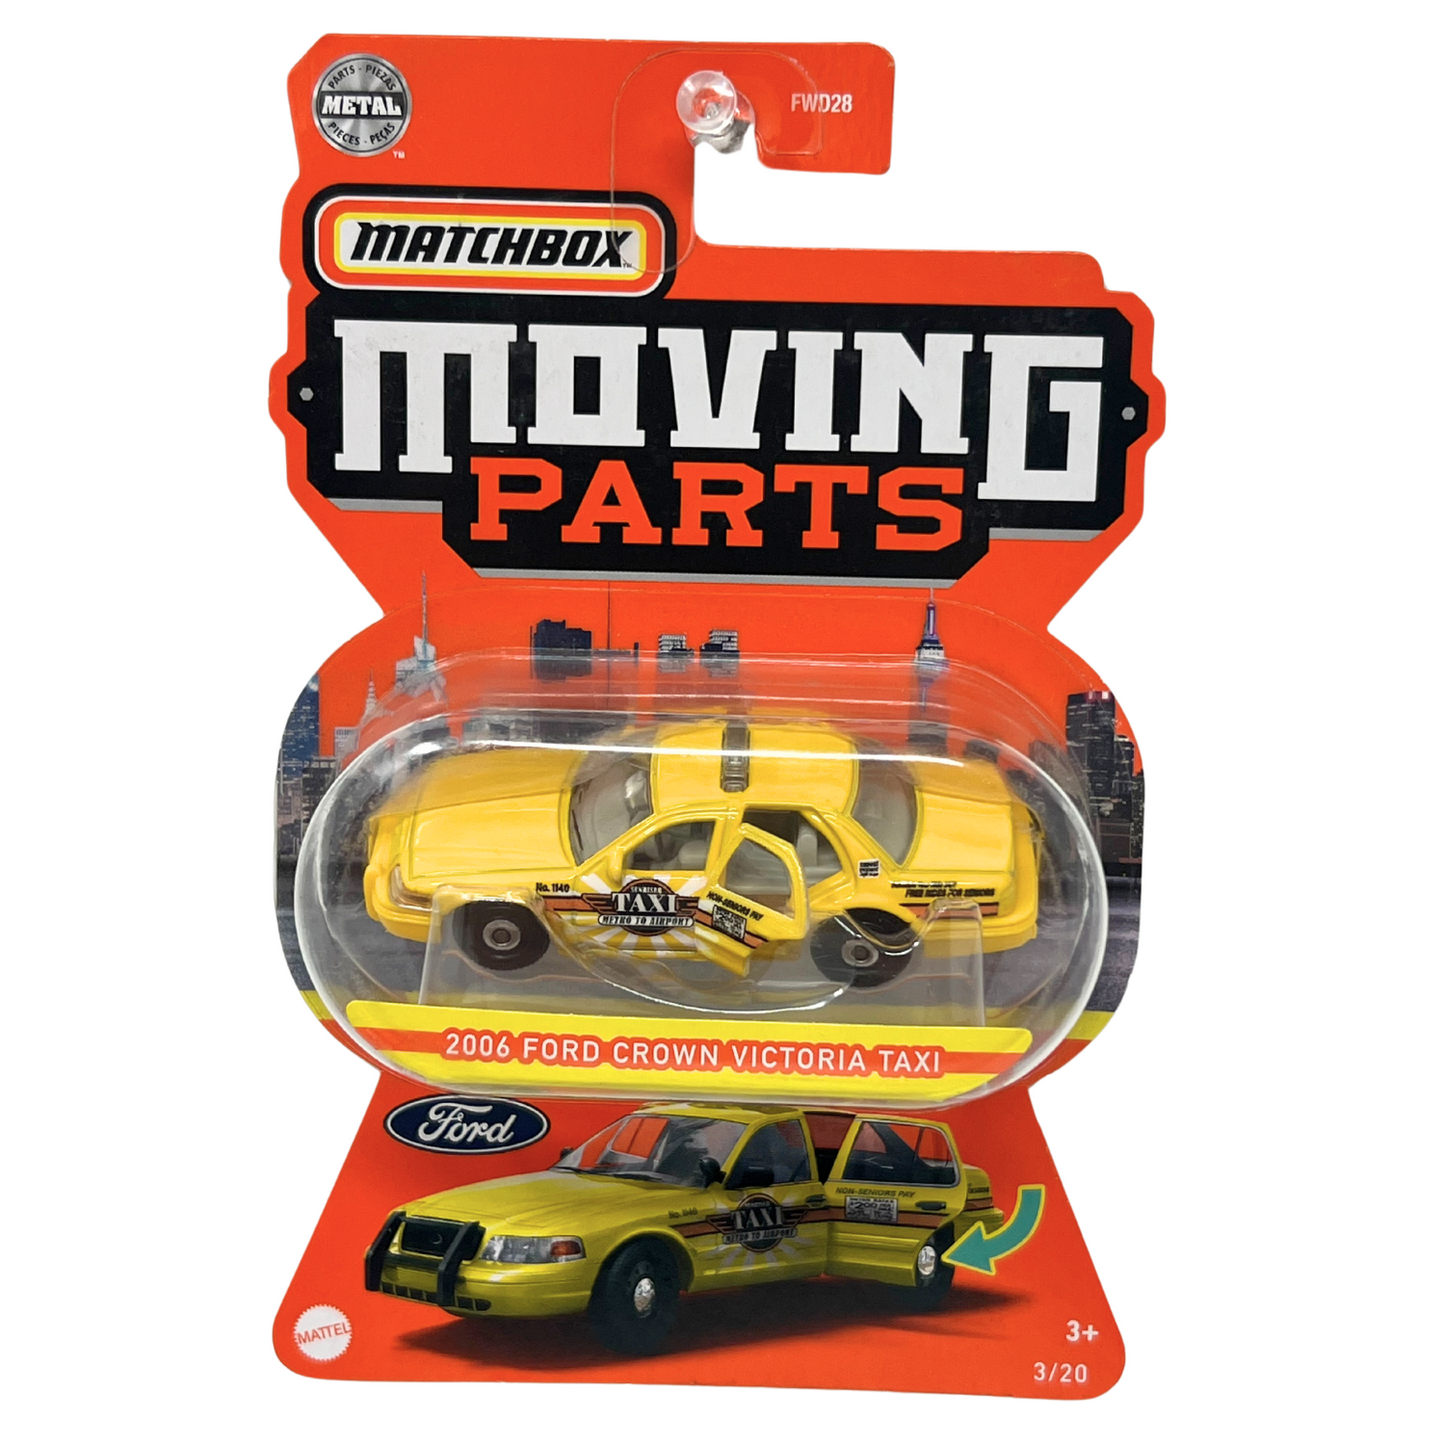 Matchbox Moving Parts 2006 Ford Crown Victoria Taxi 1:64 Diecast